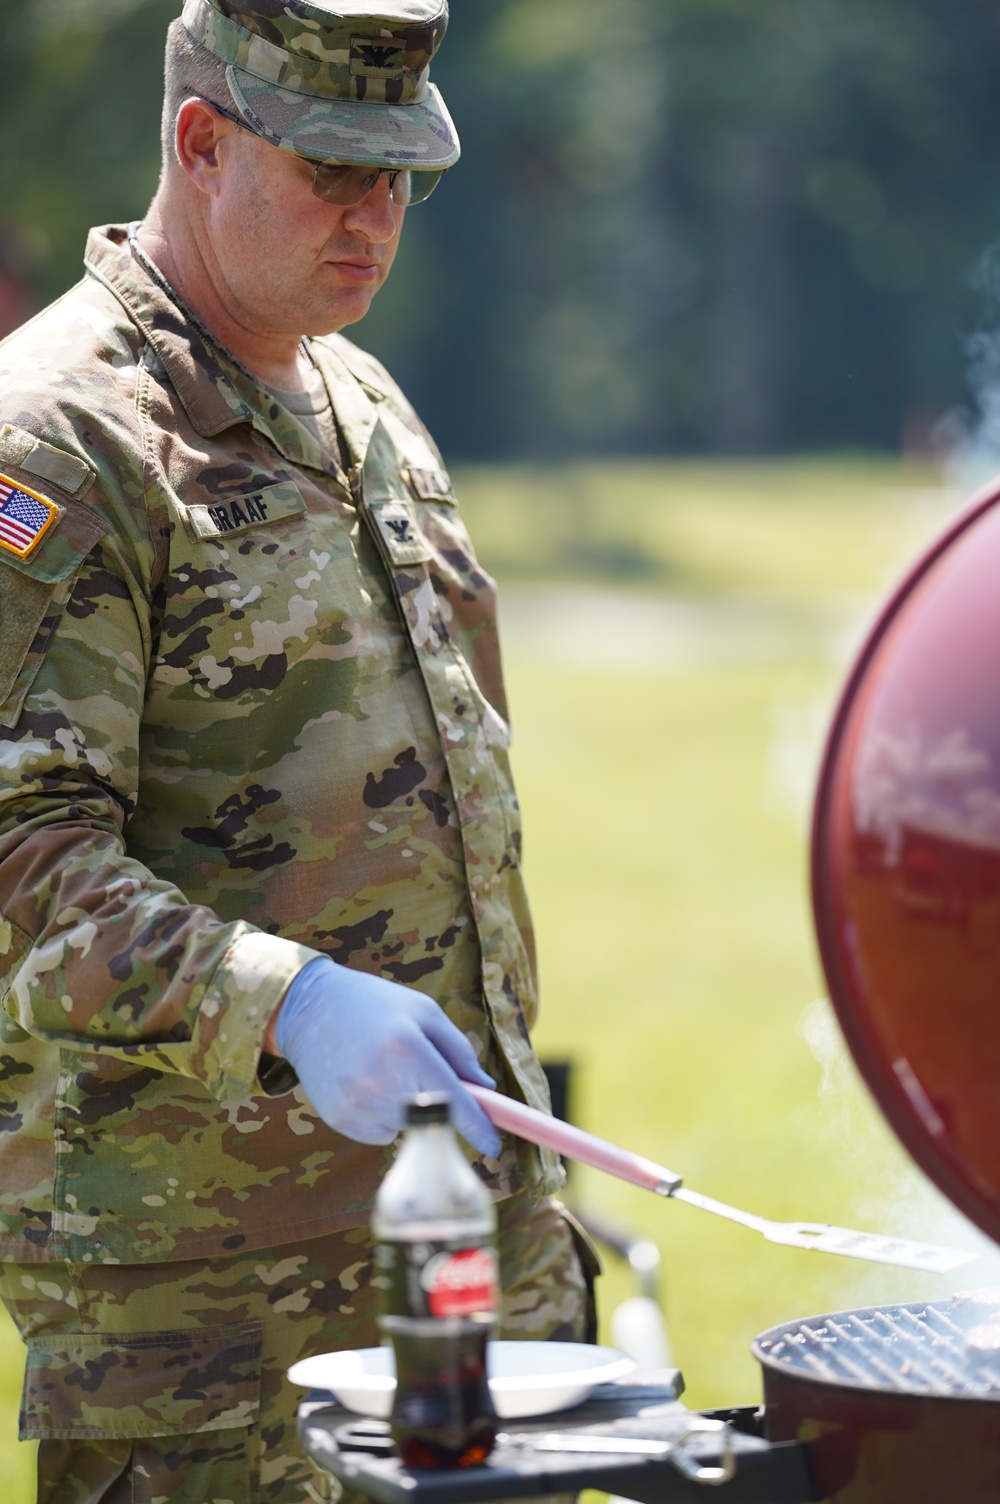 81st Readiness Division Enjoys Strong Bonds Event